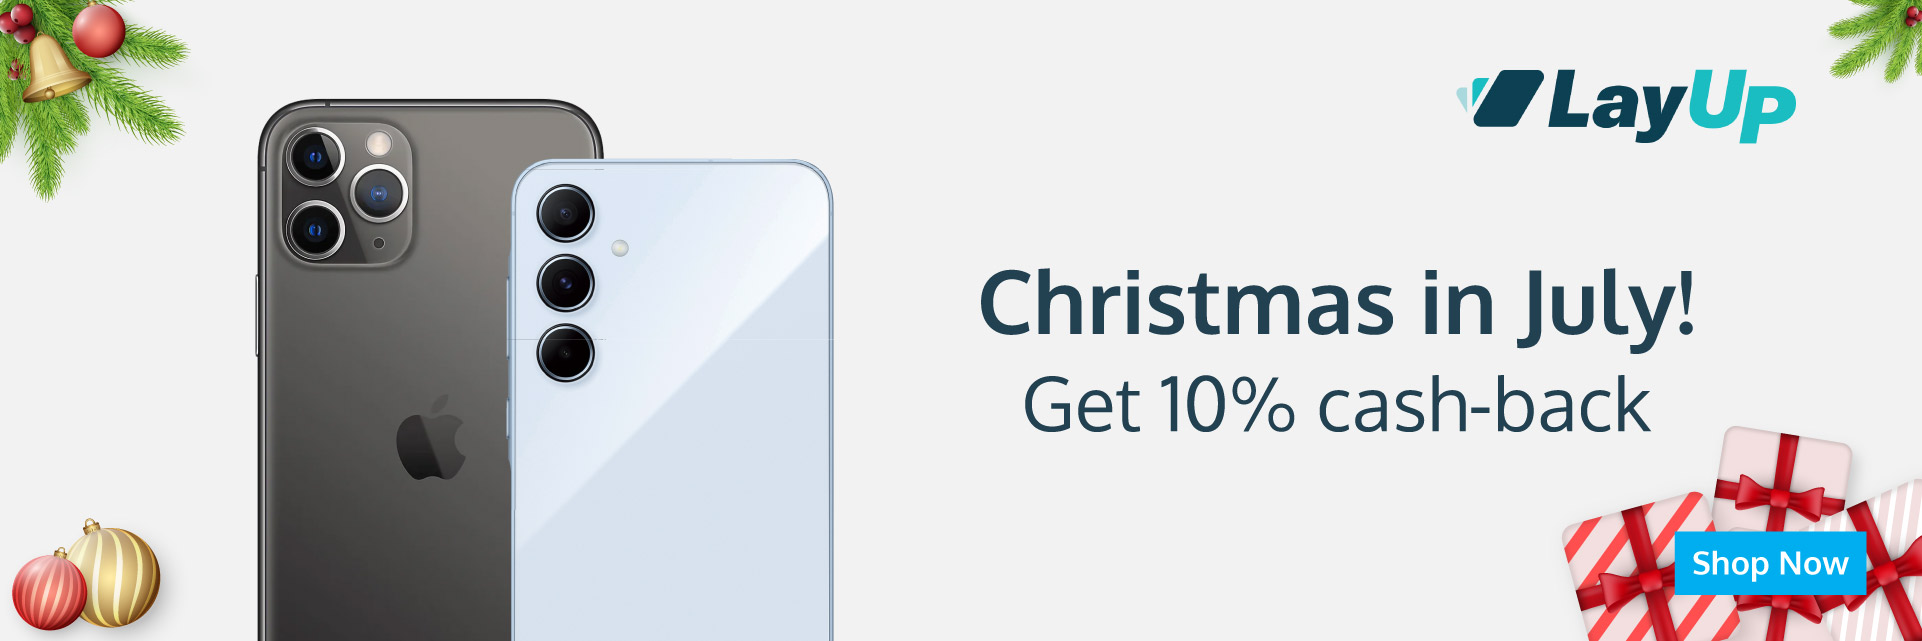 Lay-Up Christmas in July Sale - Get 10% cash back with layup